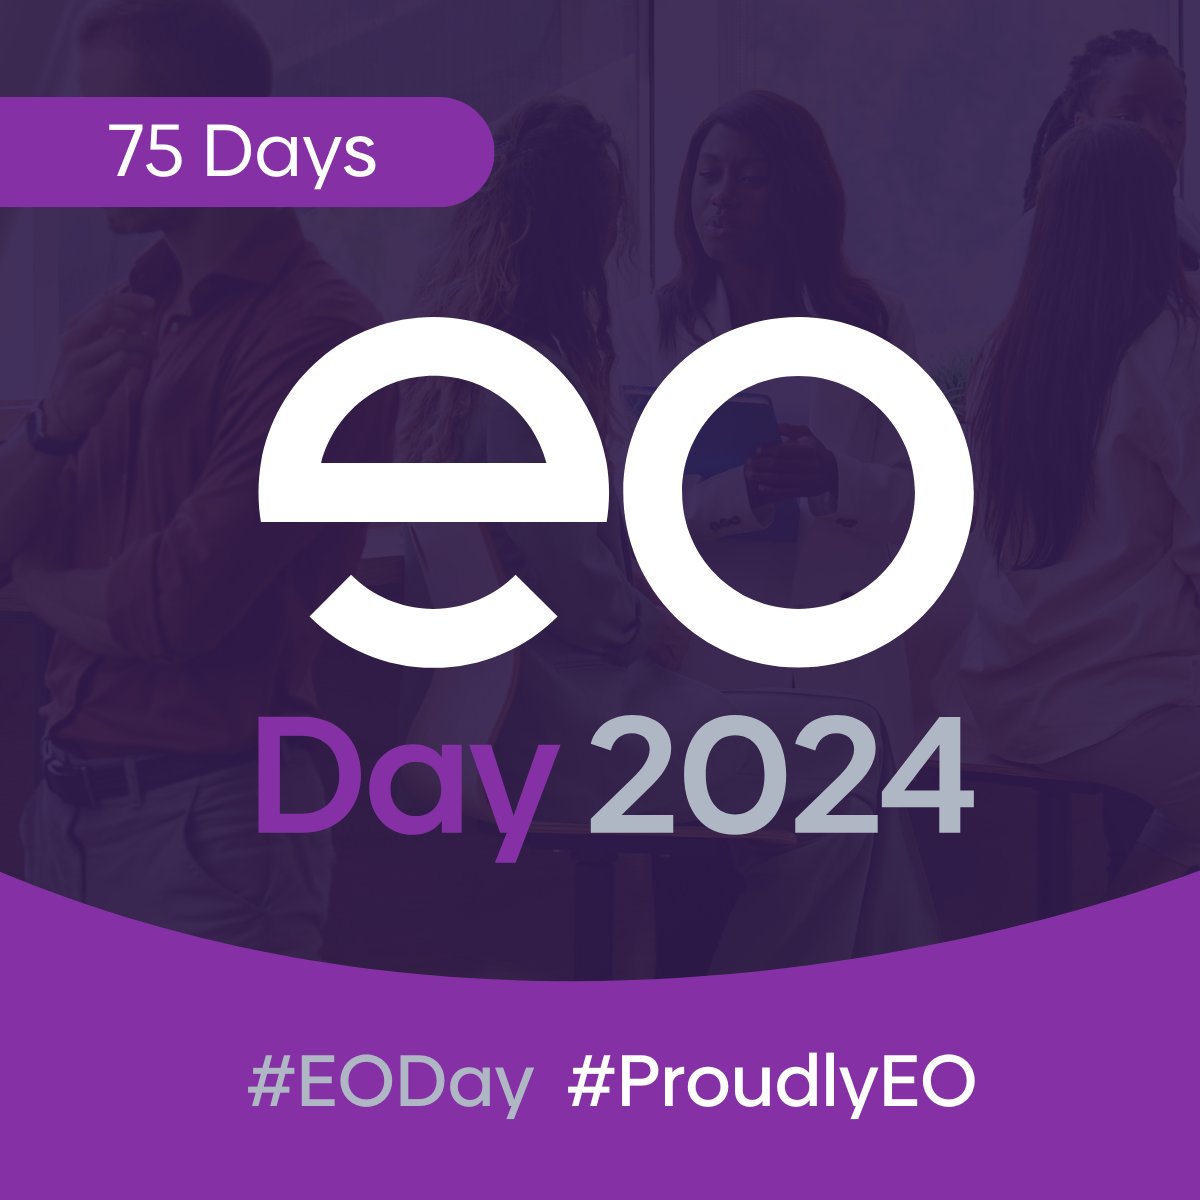 🚨75 days until EO Day 2024🚨 Mark June 21 in your diary for the 12th annual EO Day. Check out our blog for a look back at previous years and get plenty of EO inspiration. ➡️employeeownership.co.uk/news/demonstra… We’ll help you craft the perfect #EODay celebrations. #ProudlyEO